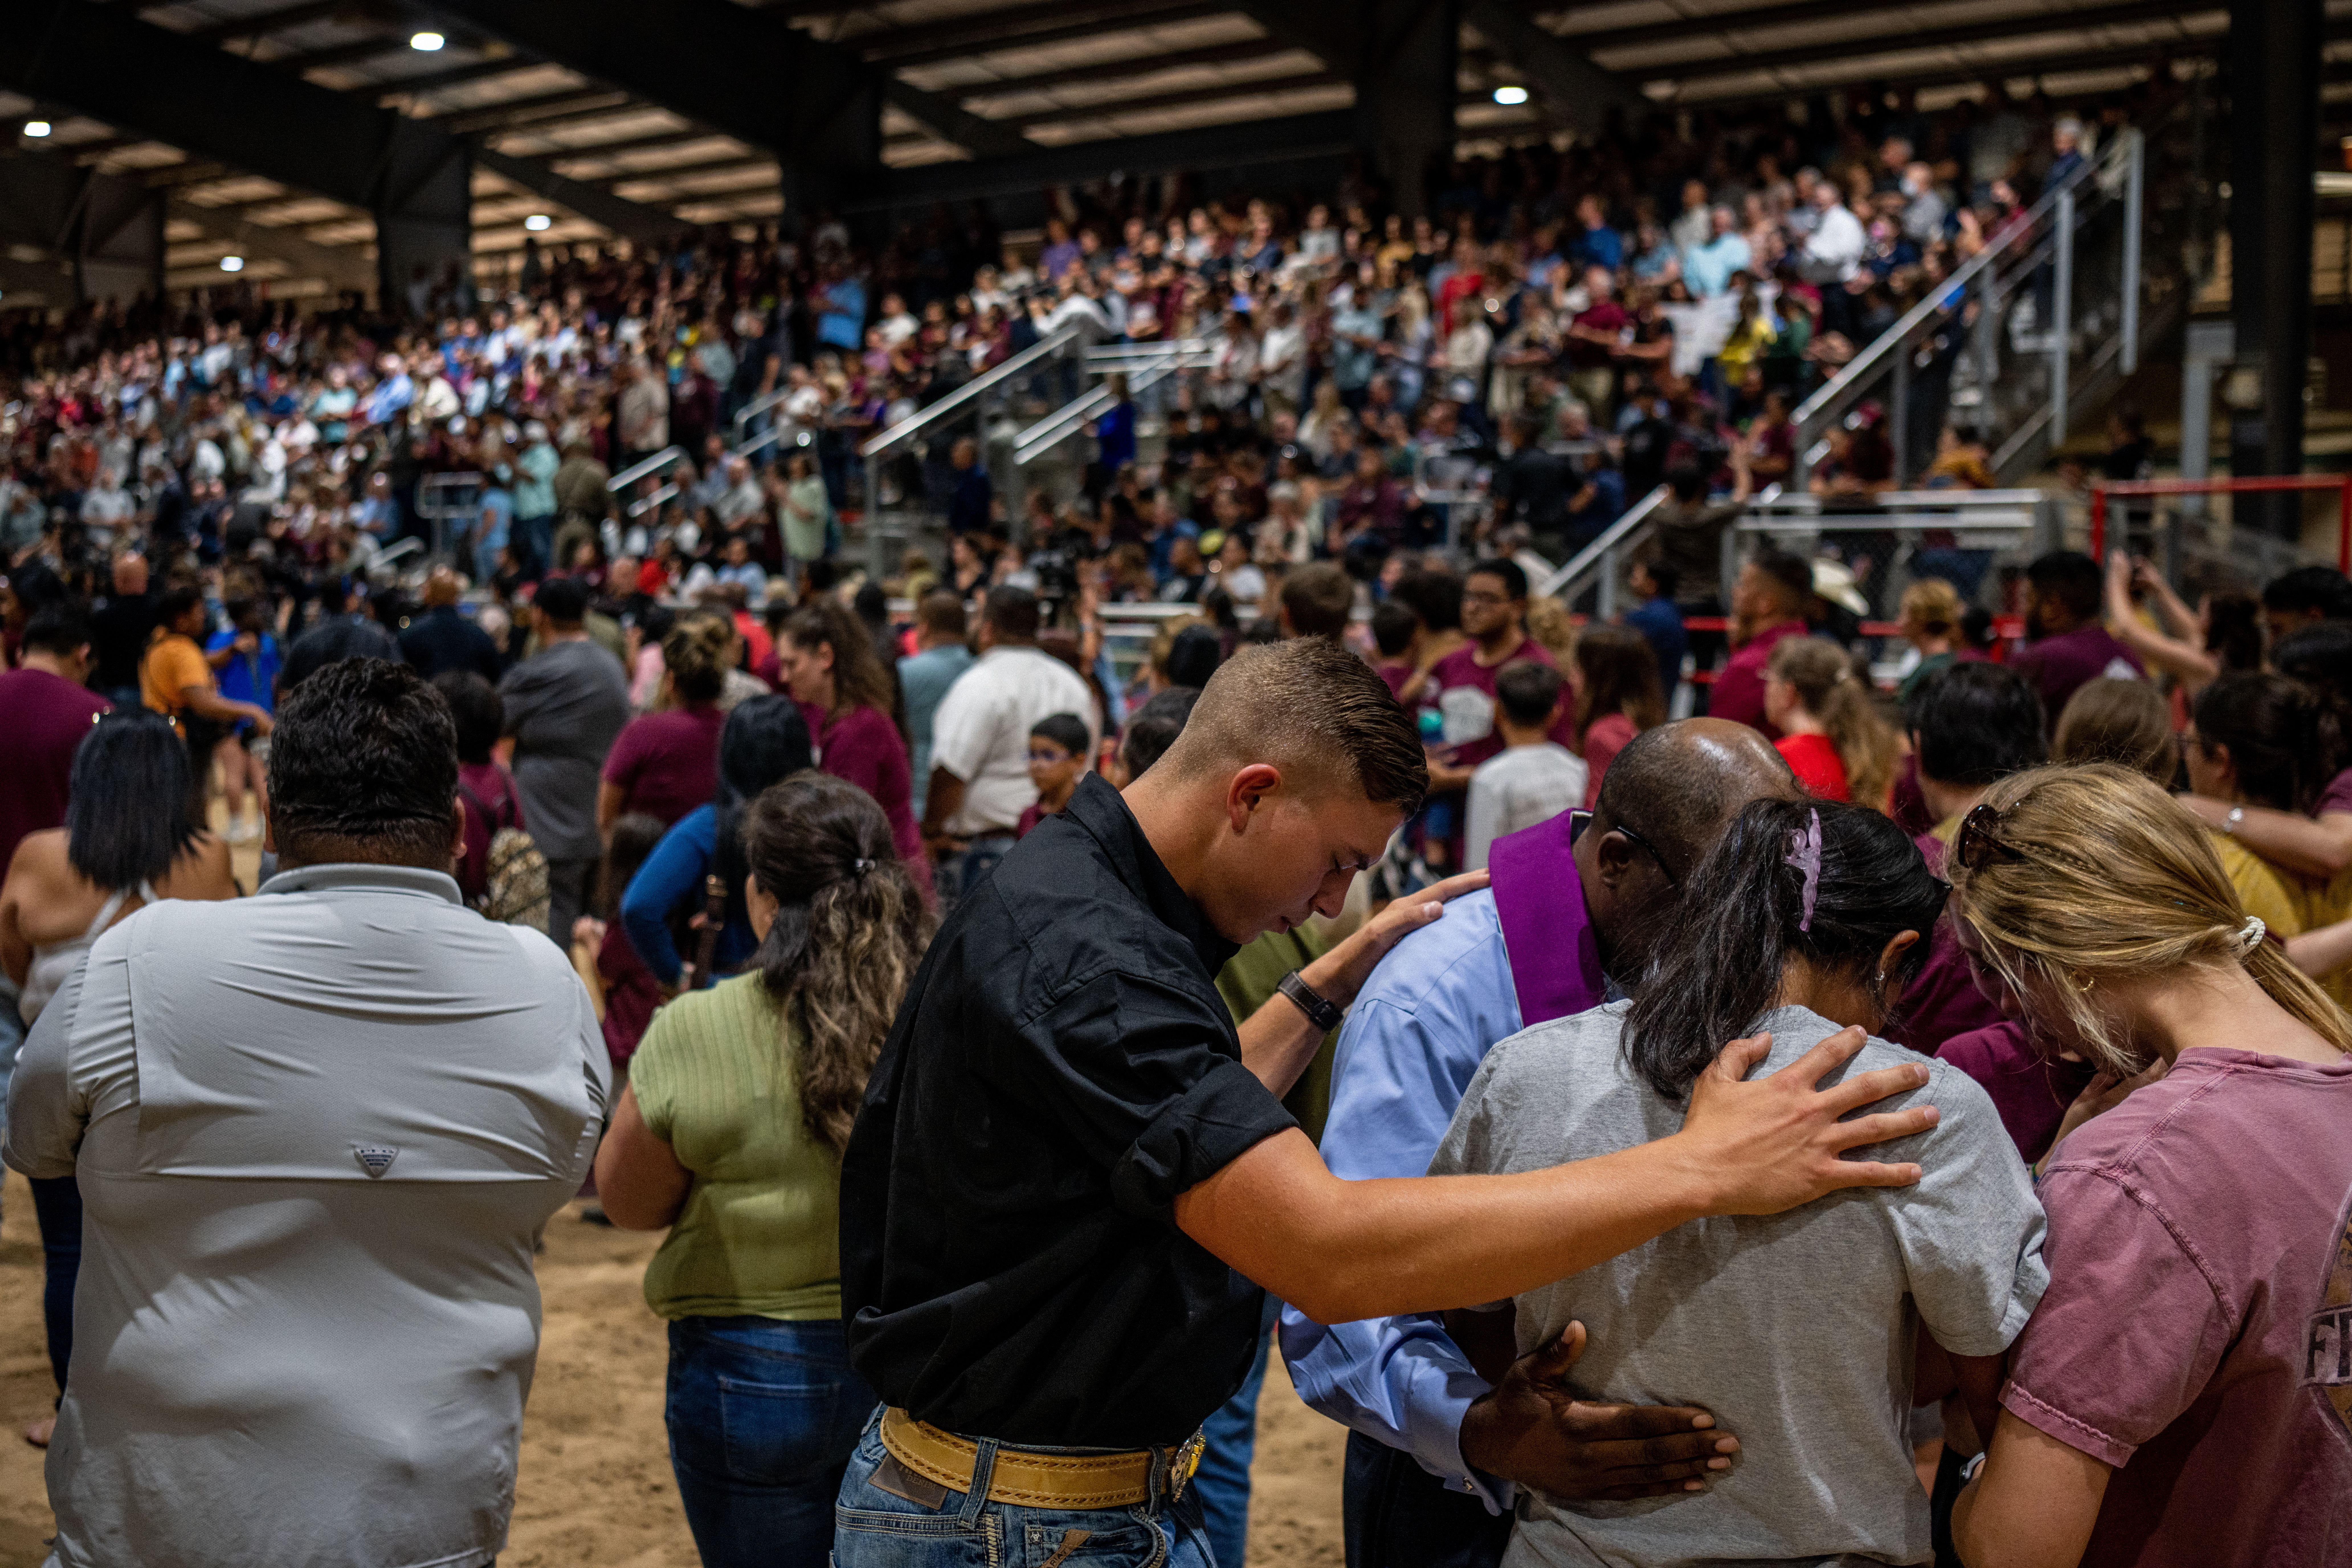 Community members pray together at a vigil for the 21 victims in the mass shooting at Rob Elementary School on May 25, 2022 in Uvalde, Texas.